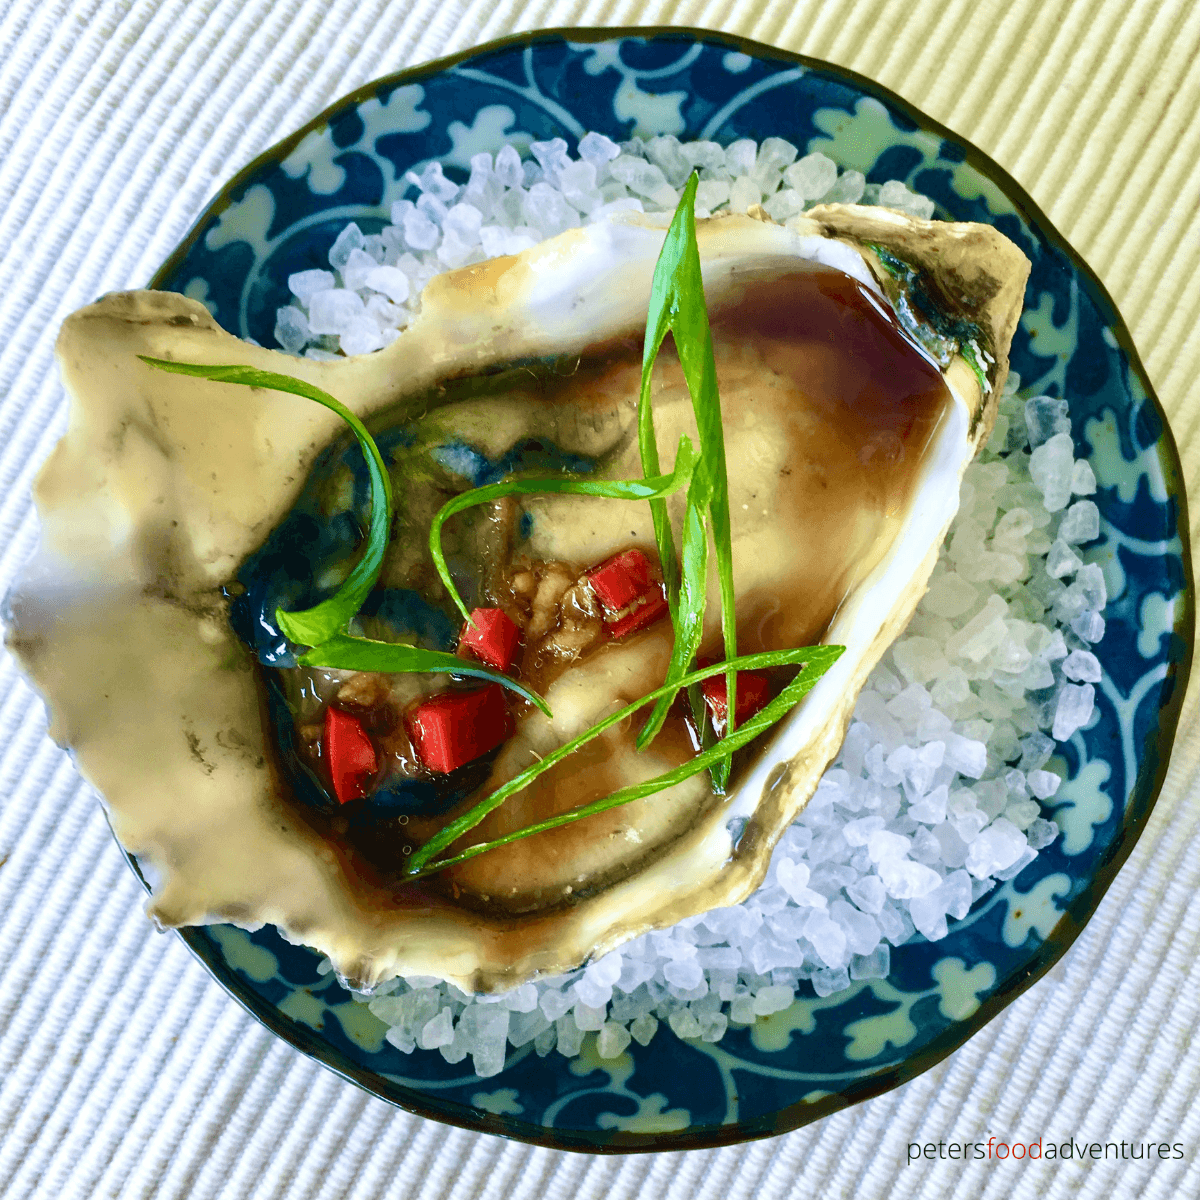 Freshly shucked oysters drizzled with an Asian vinaigrette, with fresh chili pepper and grated ginger. You'll definitely fall in love with my Asian Oyster Dressing!